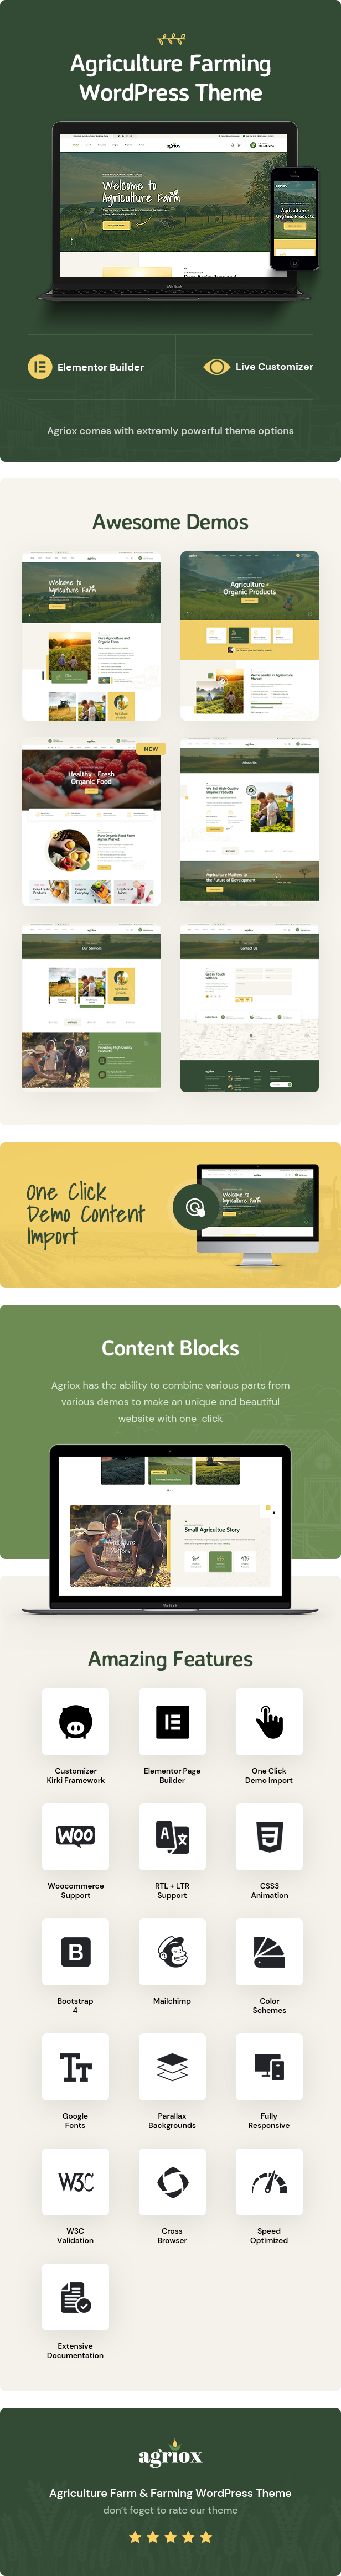 Agriox - Agriculture Farming WordPress Theme - 1